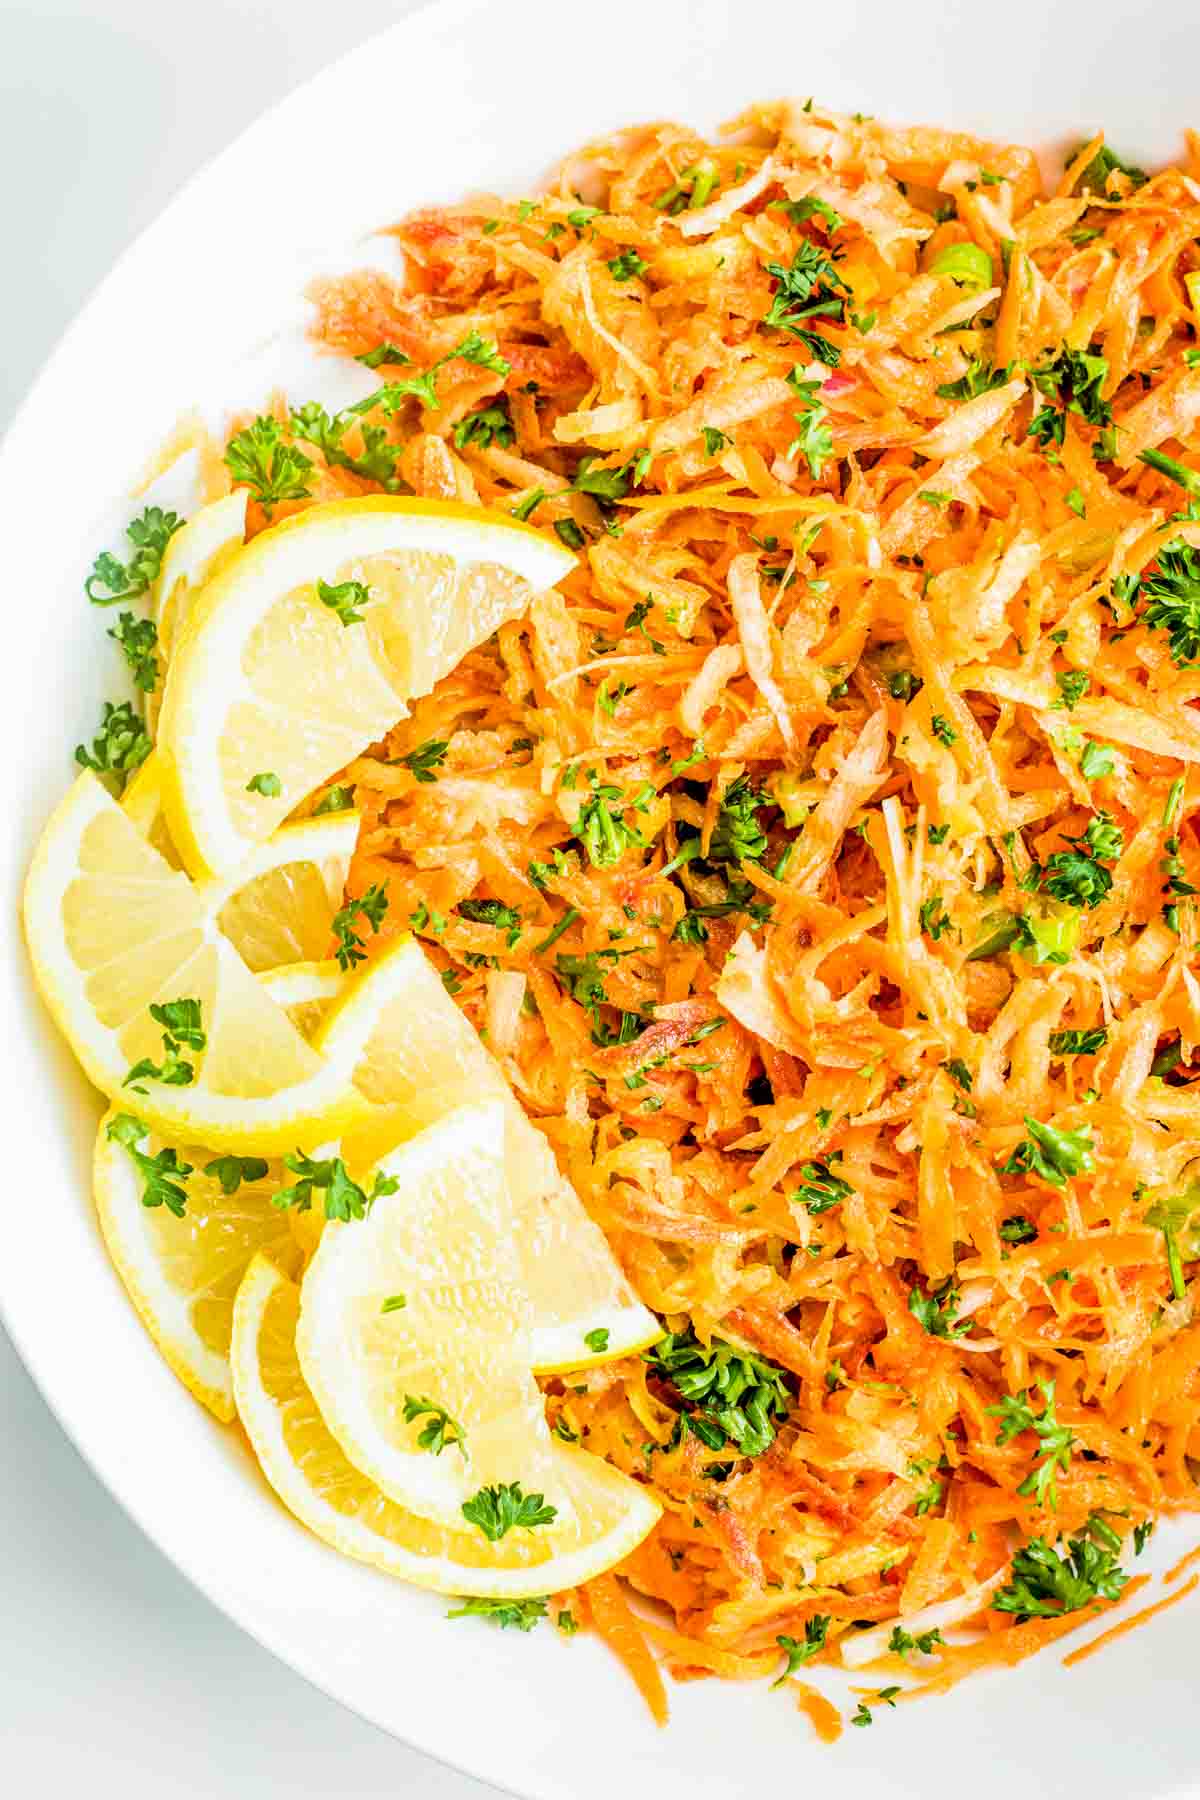 A bowl of shredded carrot salad garnished with lemon slices and parsley.